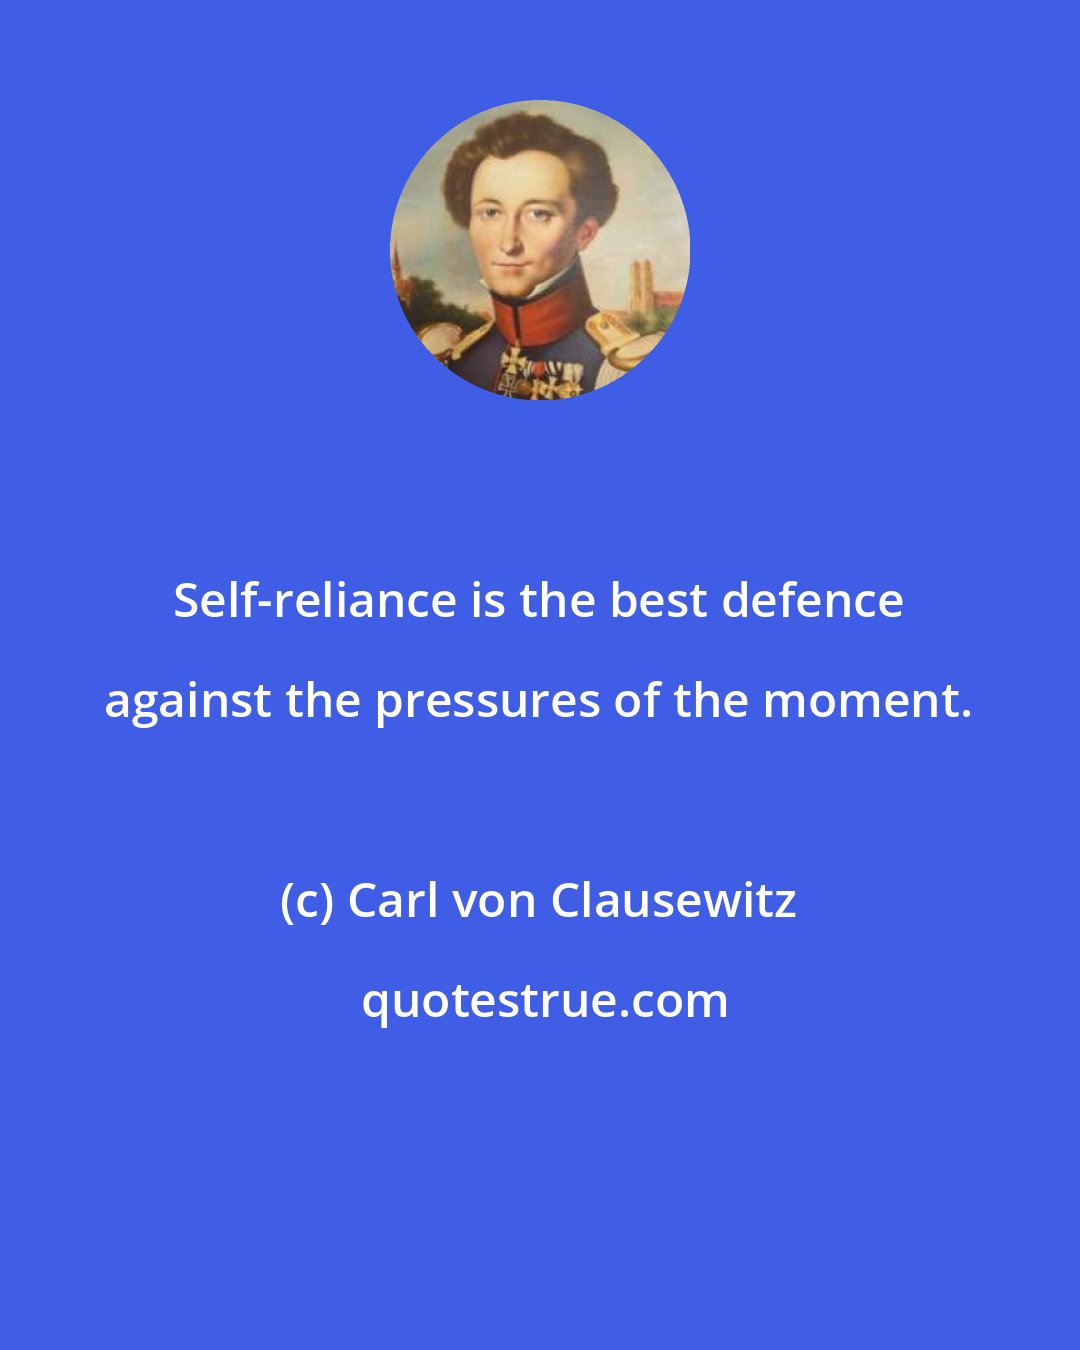 Carl von Clausewitz: Self-reliance is the best defence against the pressures of the moment.